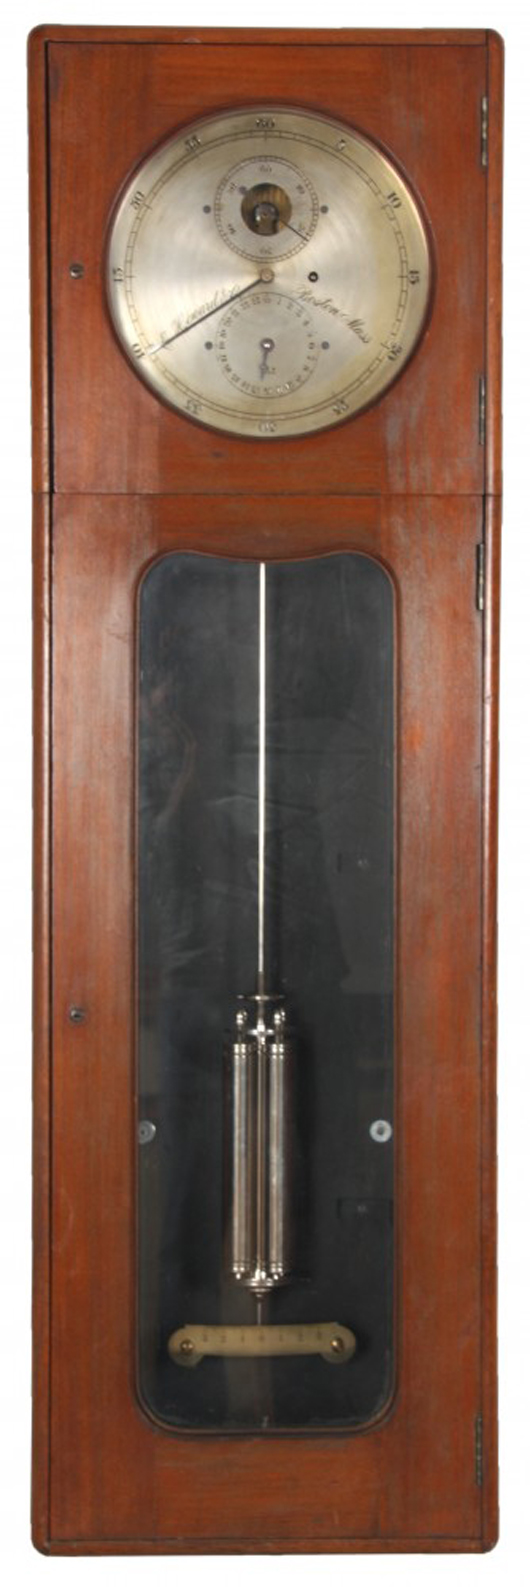 E. Howard & Co. No. 74 astronomical observatory regulator clock with 12-inch dial. Price realized: $41,300. Fontaine’s Auction Gallery image.